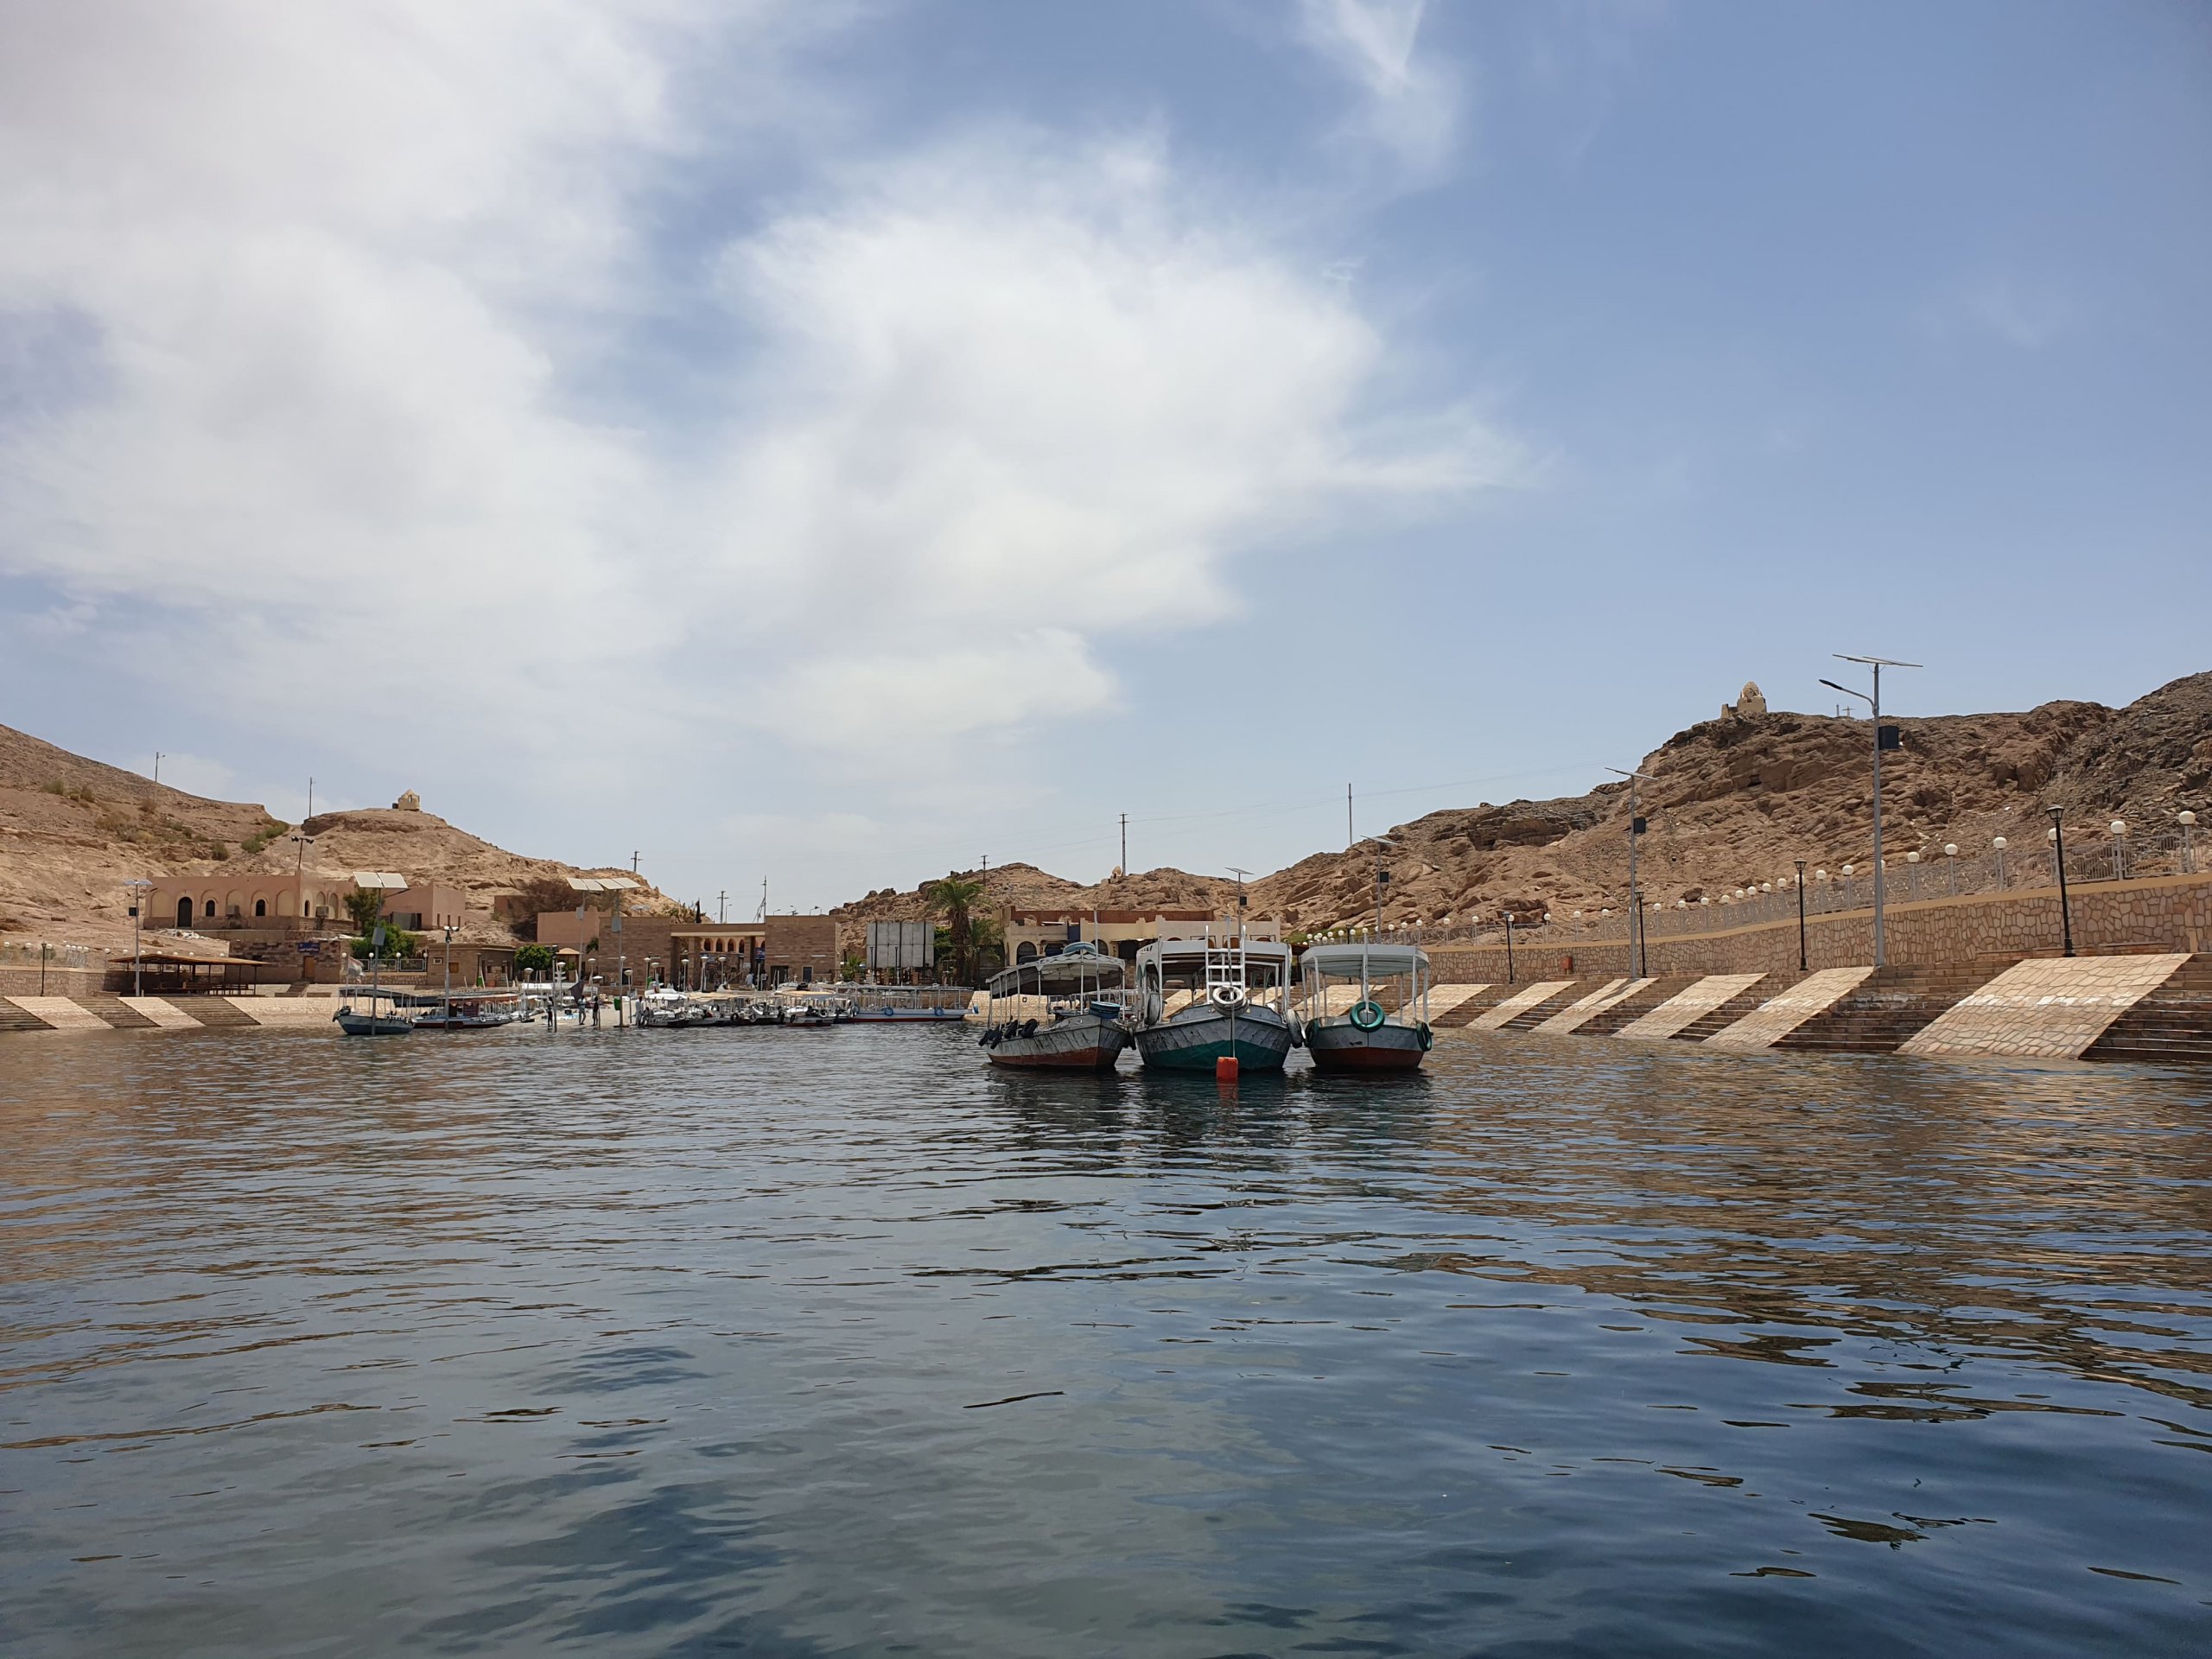 Not a bad spot from which to explore northern Lake Nasser.